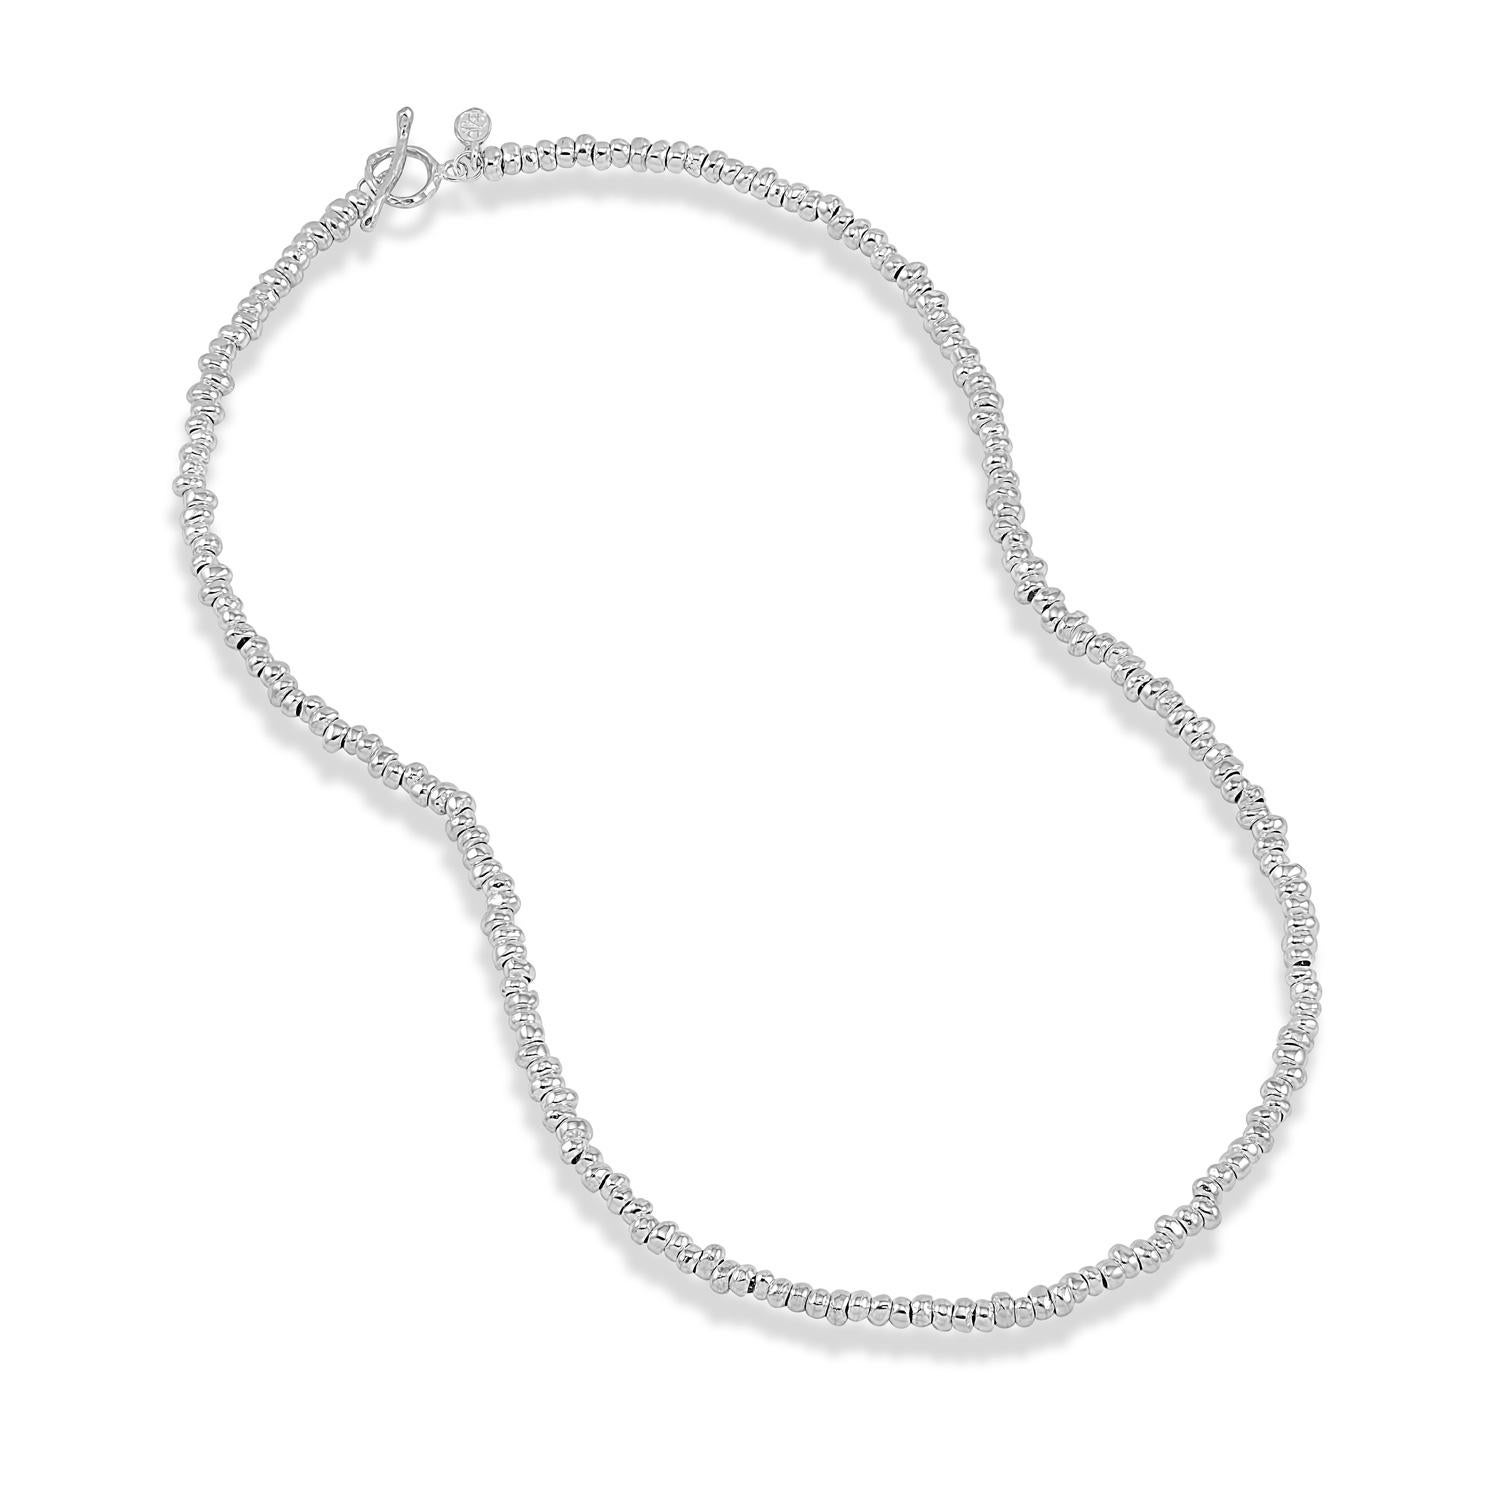 An iconic Dower & Hall design, this sterling silver Nomad necklace is made of small pebble-shaped nuggets threaded onto chain. The necklace is finished with our signature hammered loop and t-bar clasp. A timeless classic.
Taking inspiration from